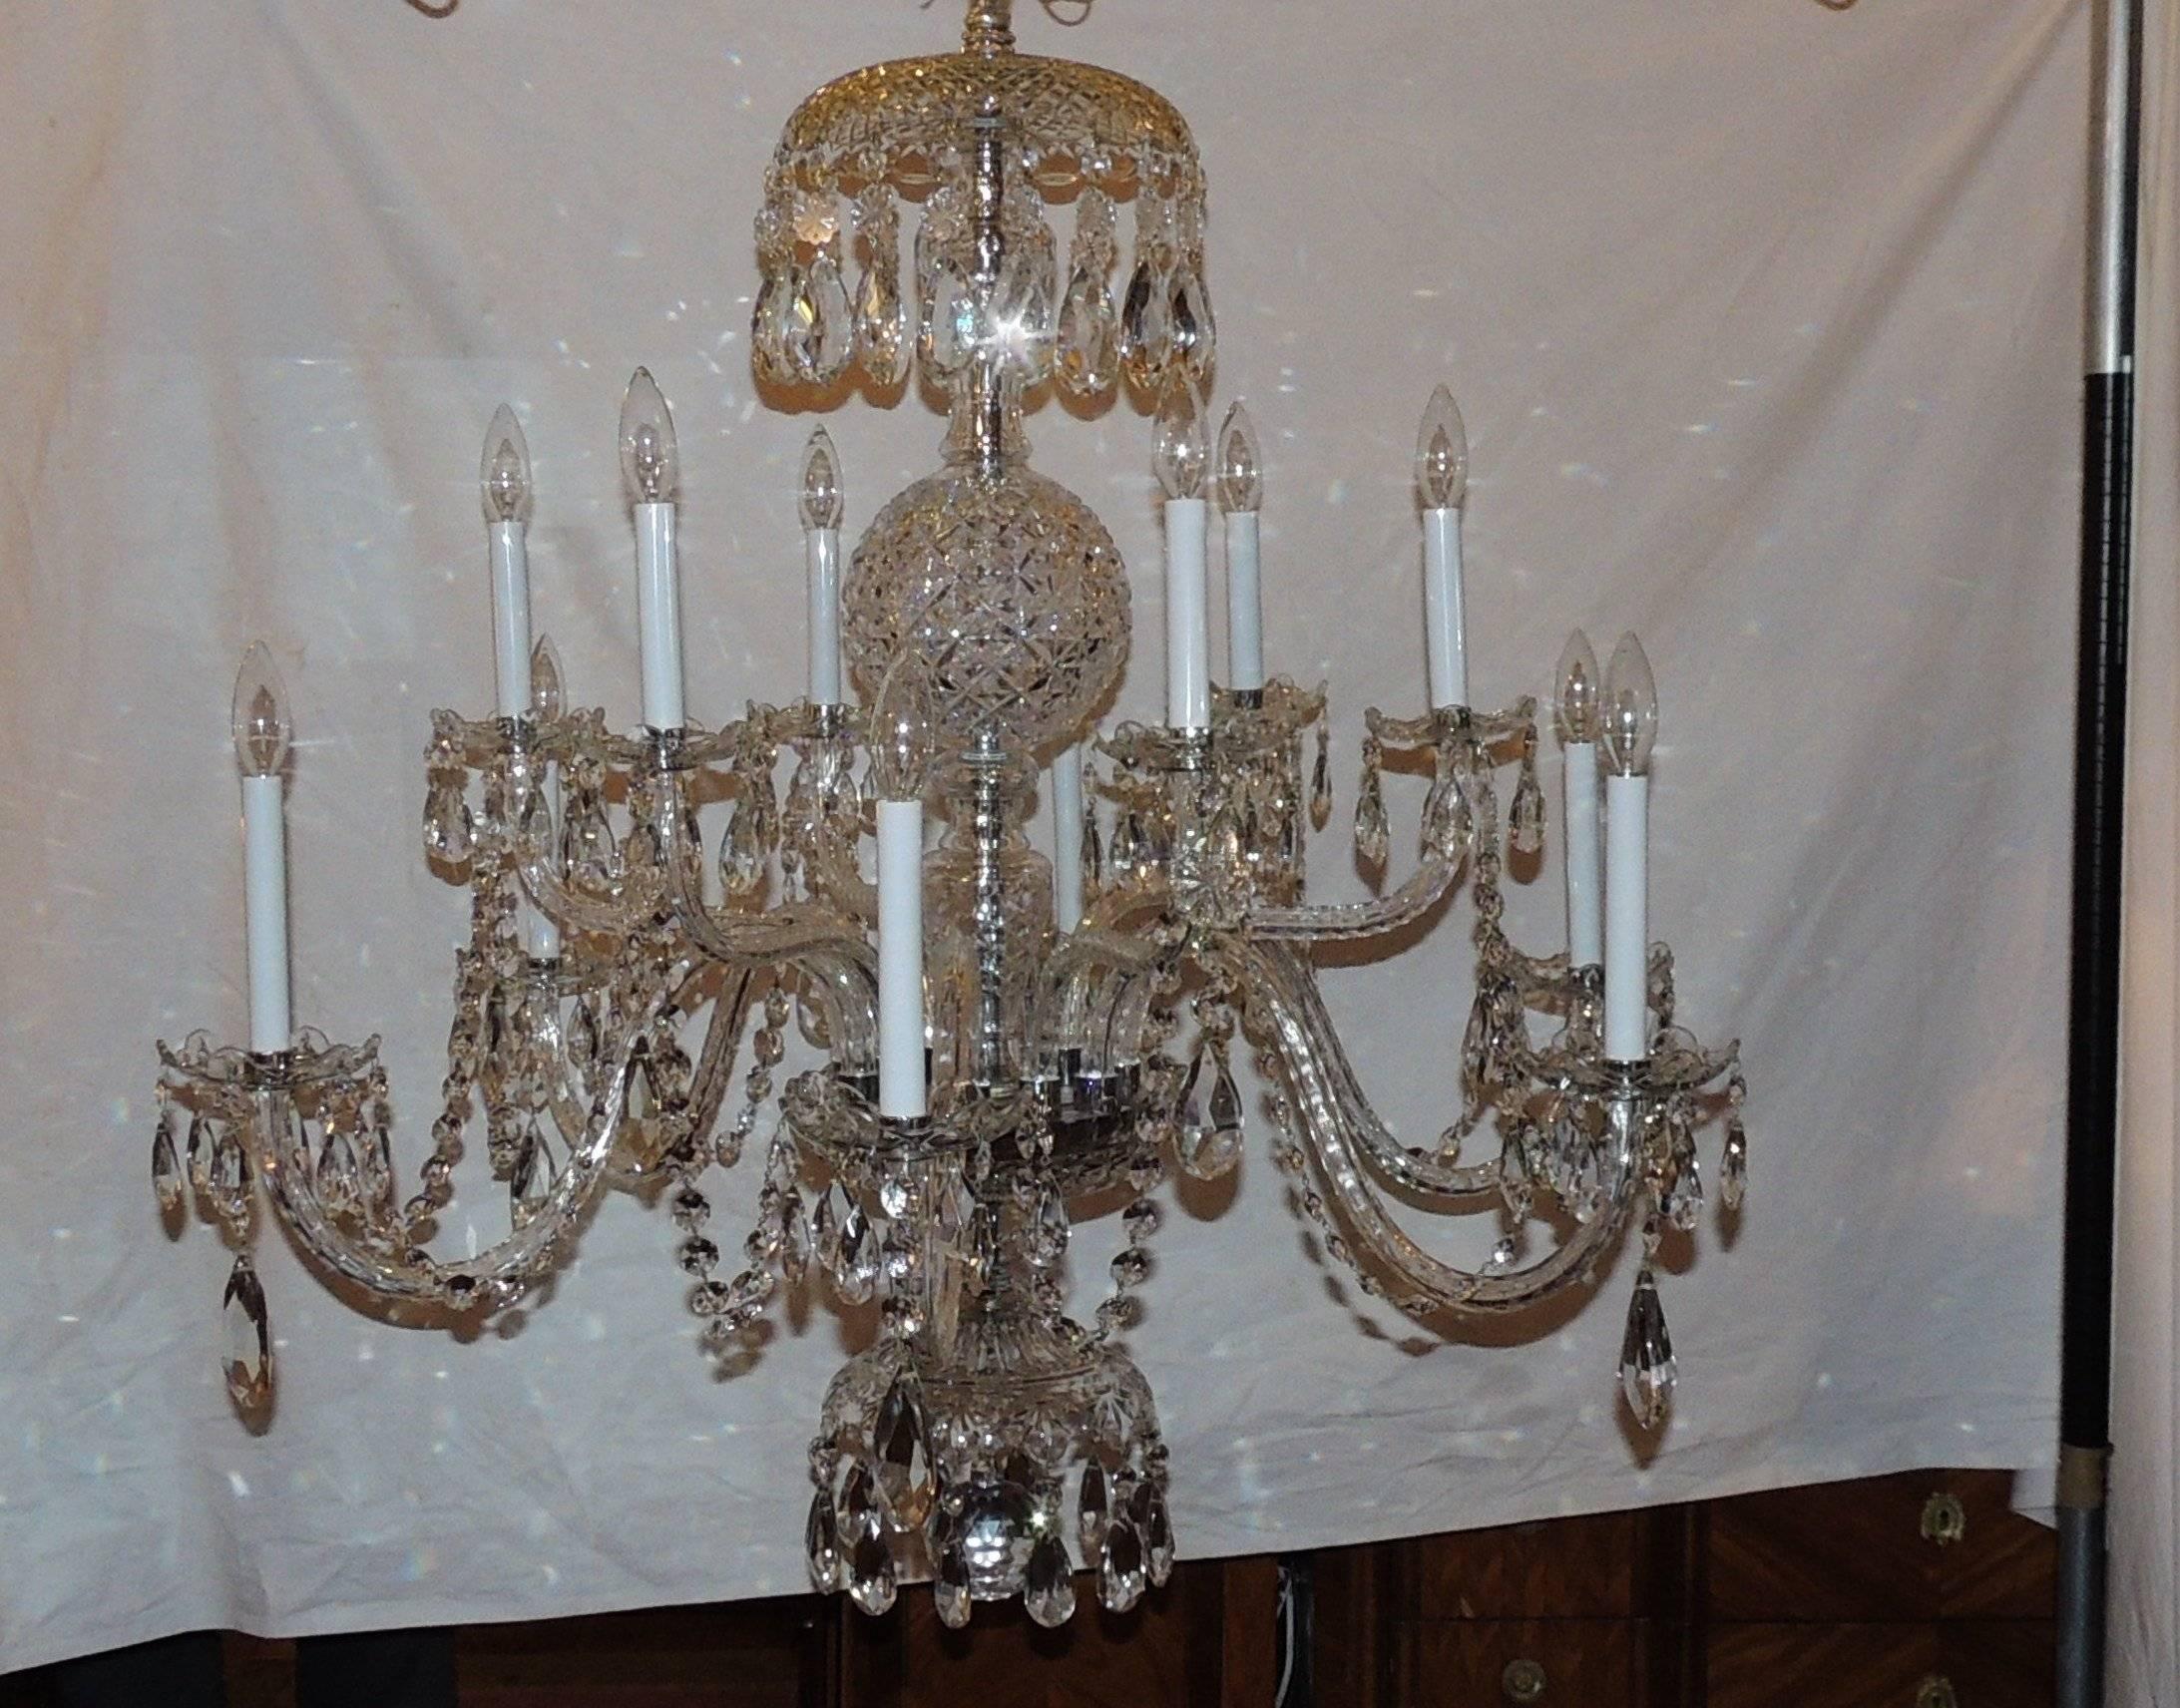 Stunning elegance describes this Waterford style crystal chandelier. The beautiful center columns are intricately designed with different techniques highlighted with a gorgeous center ball. Each of the crystal bobeches are ringed with beautiful